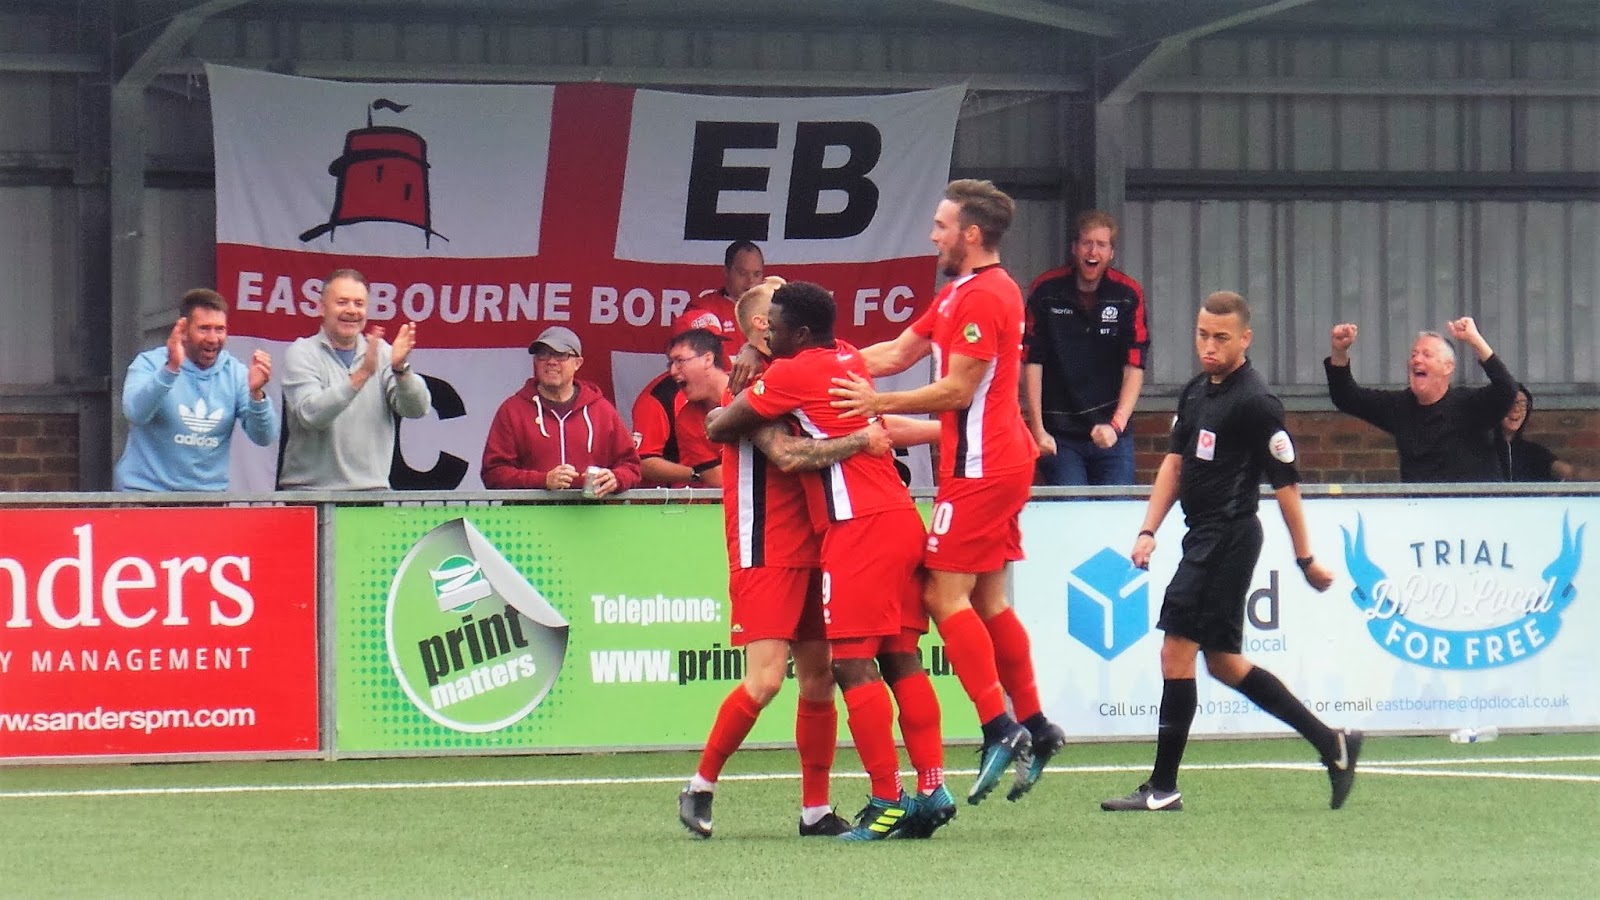 Eastbourne Borough F.C. Wallpapers